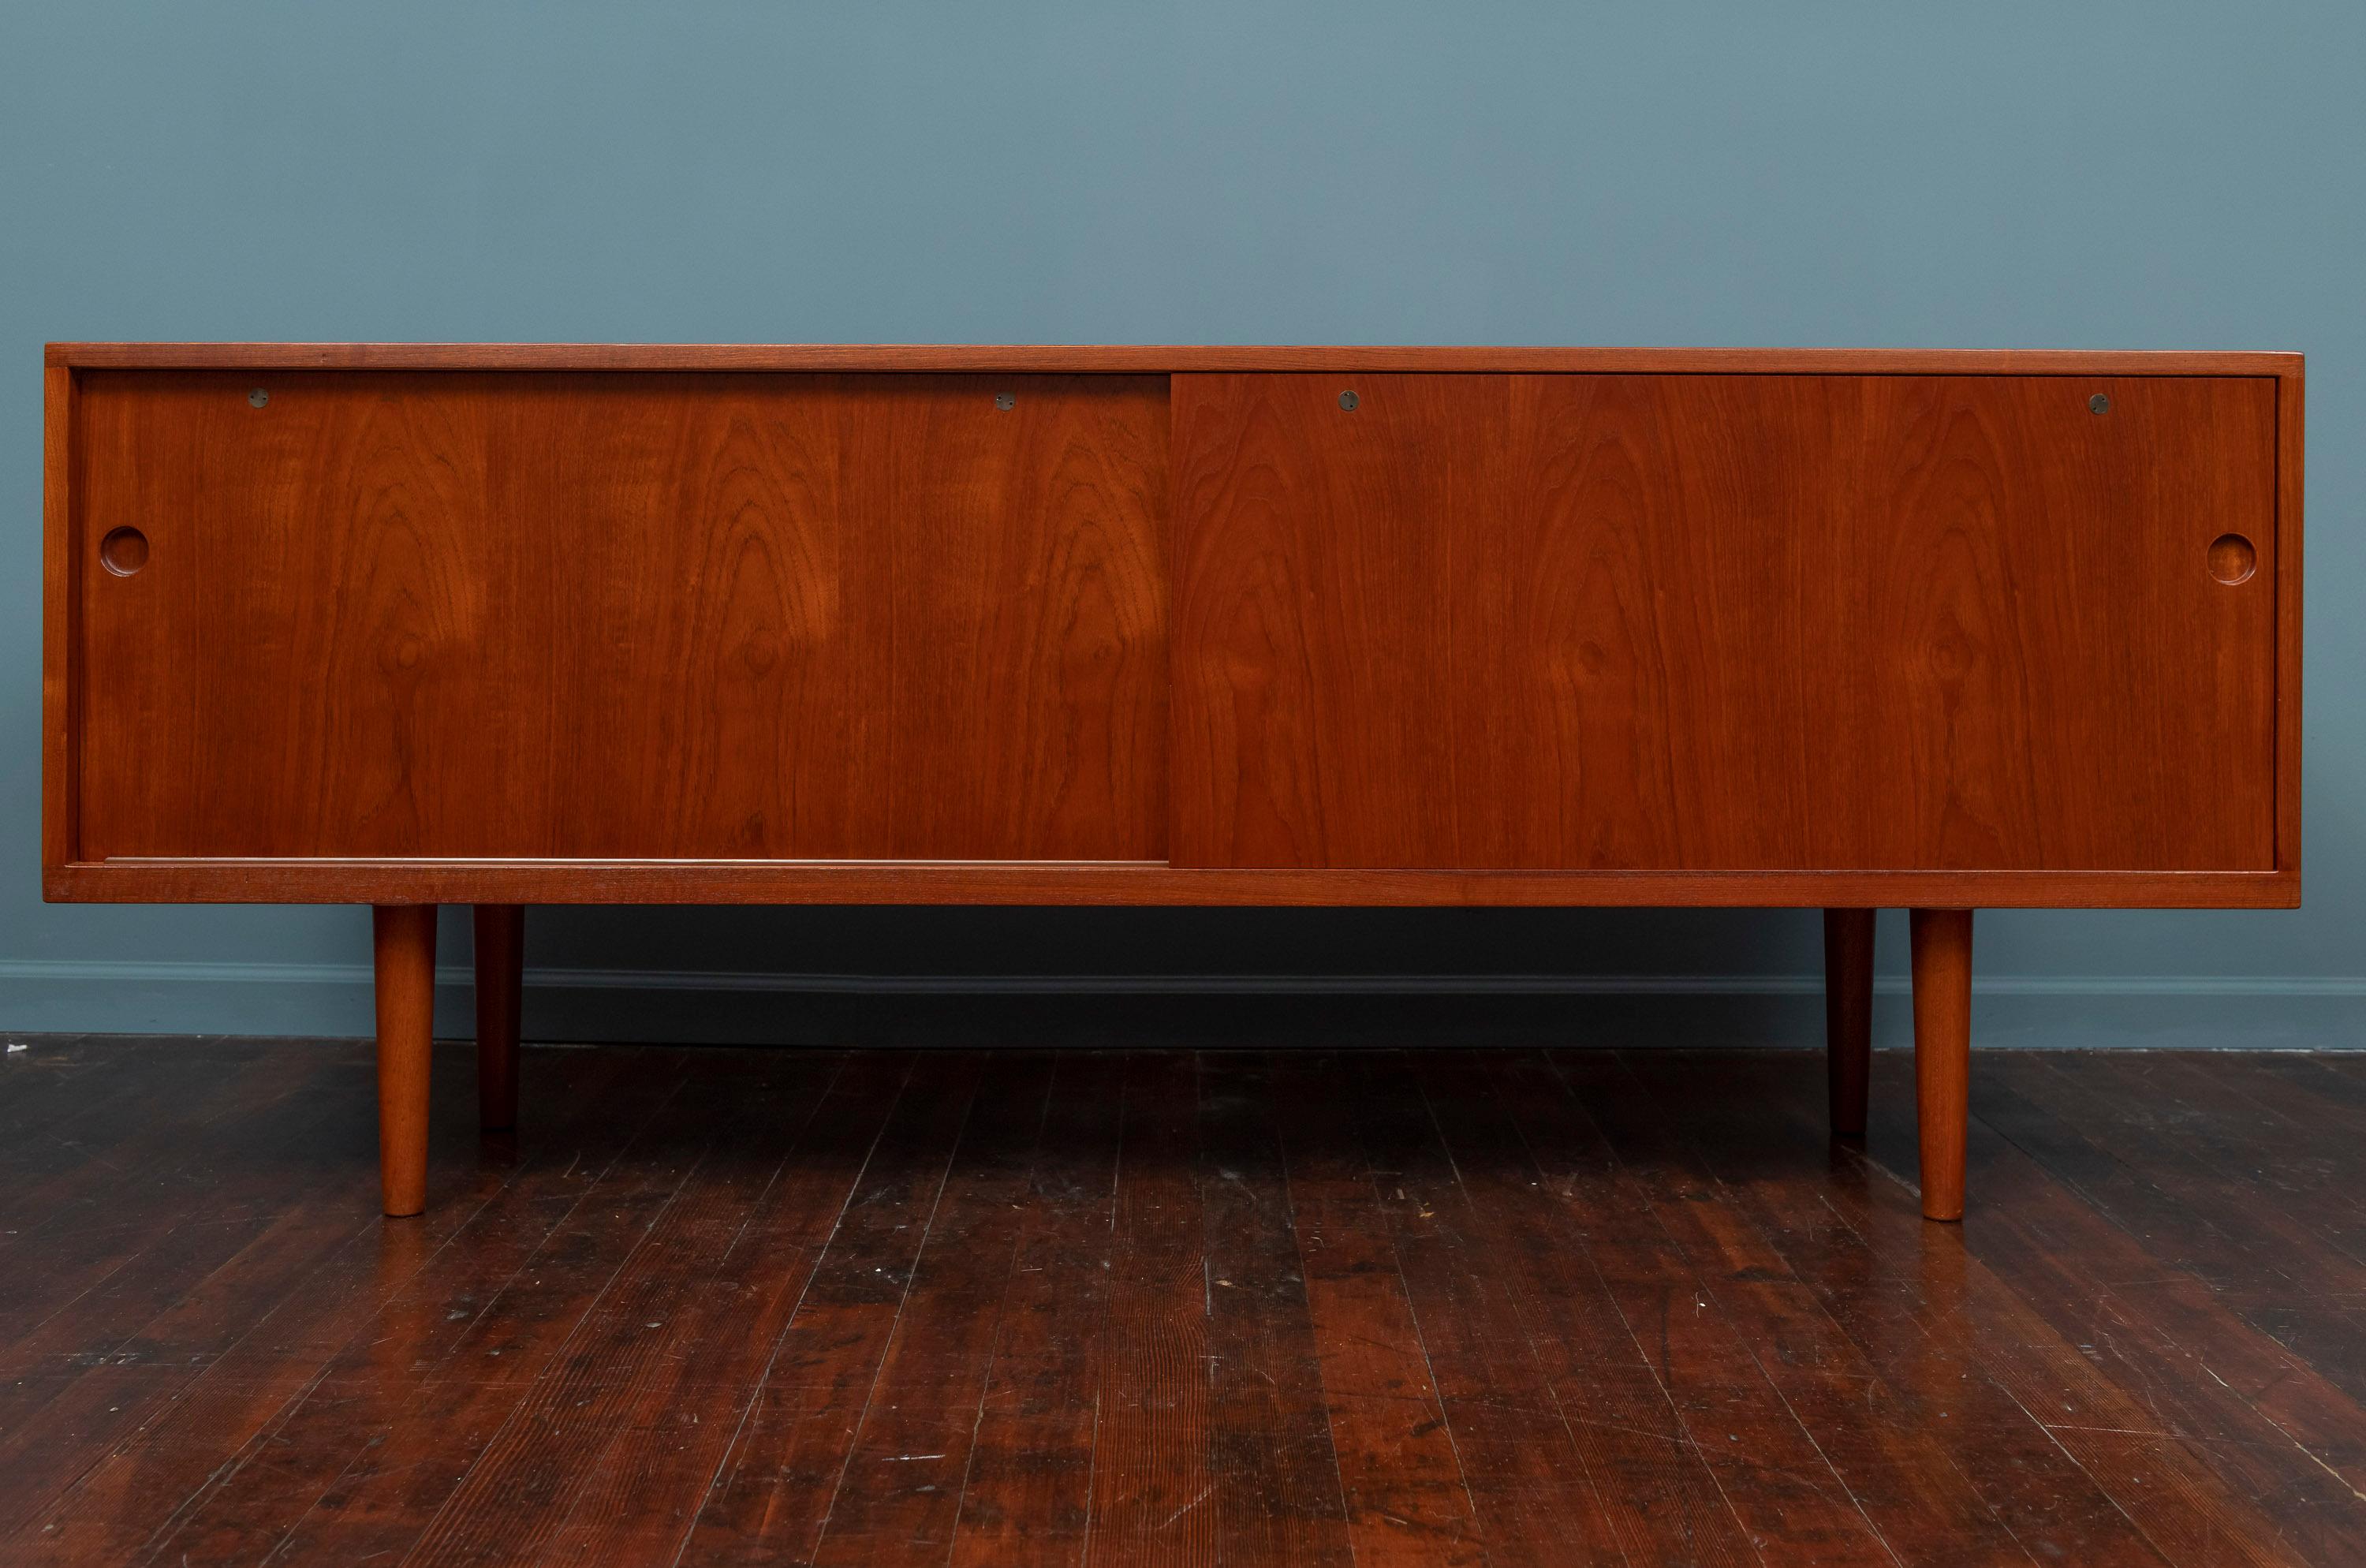 Hans Wegner design teak credenza for Ry Mobler Model 26, Denmark. Sophisticated in its simplicity with high quality construction techniques and attention to detail. Newly refinished and ready to install.